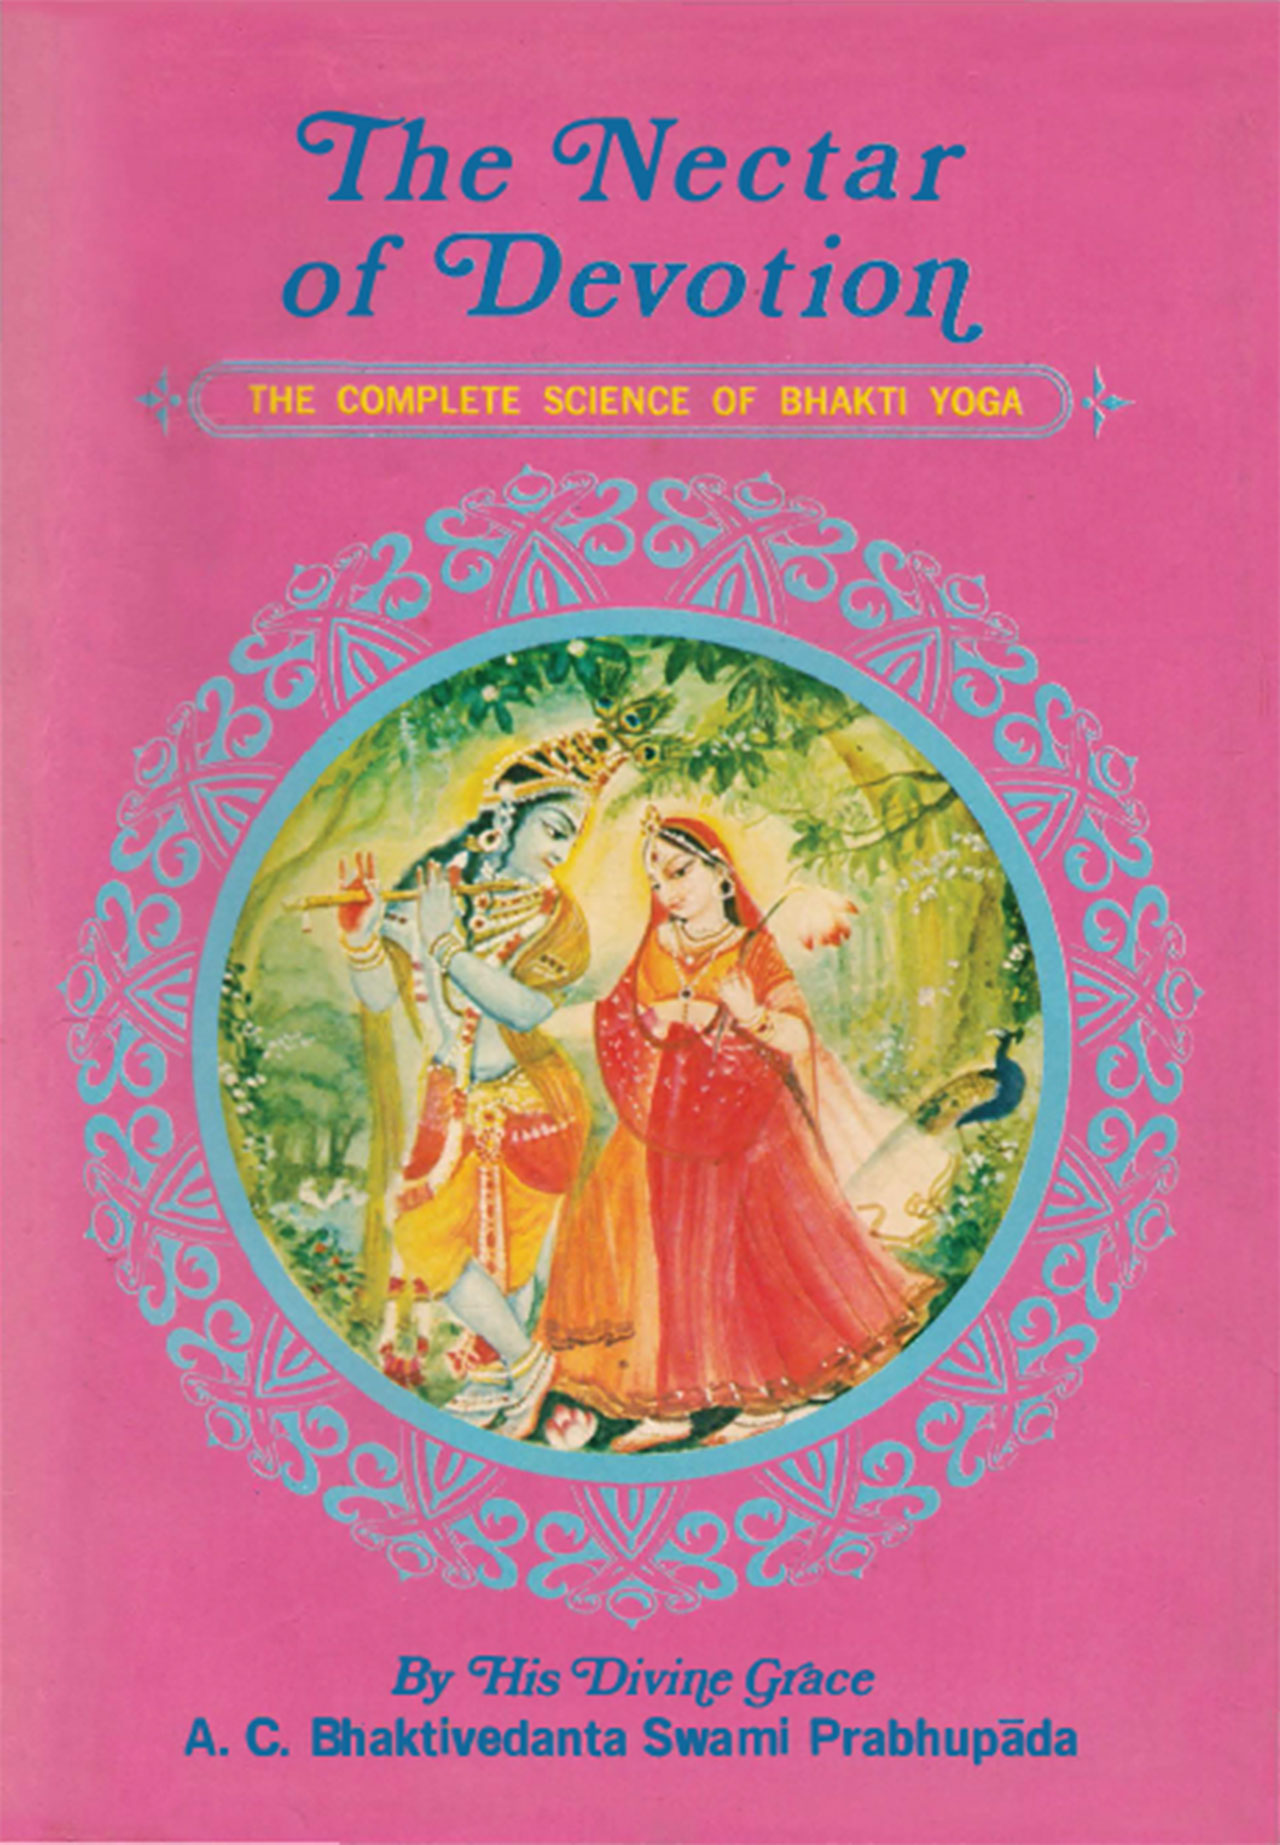 1970 The Nectar of Devotion